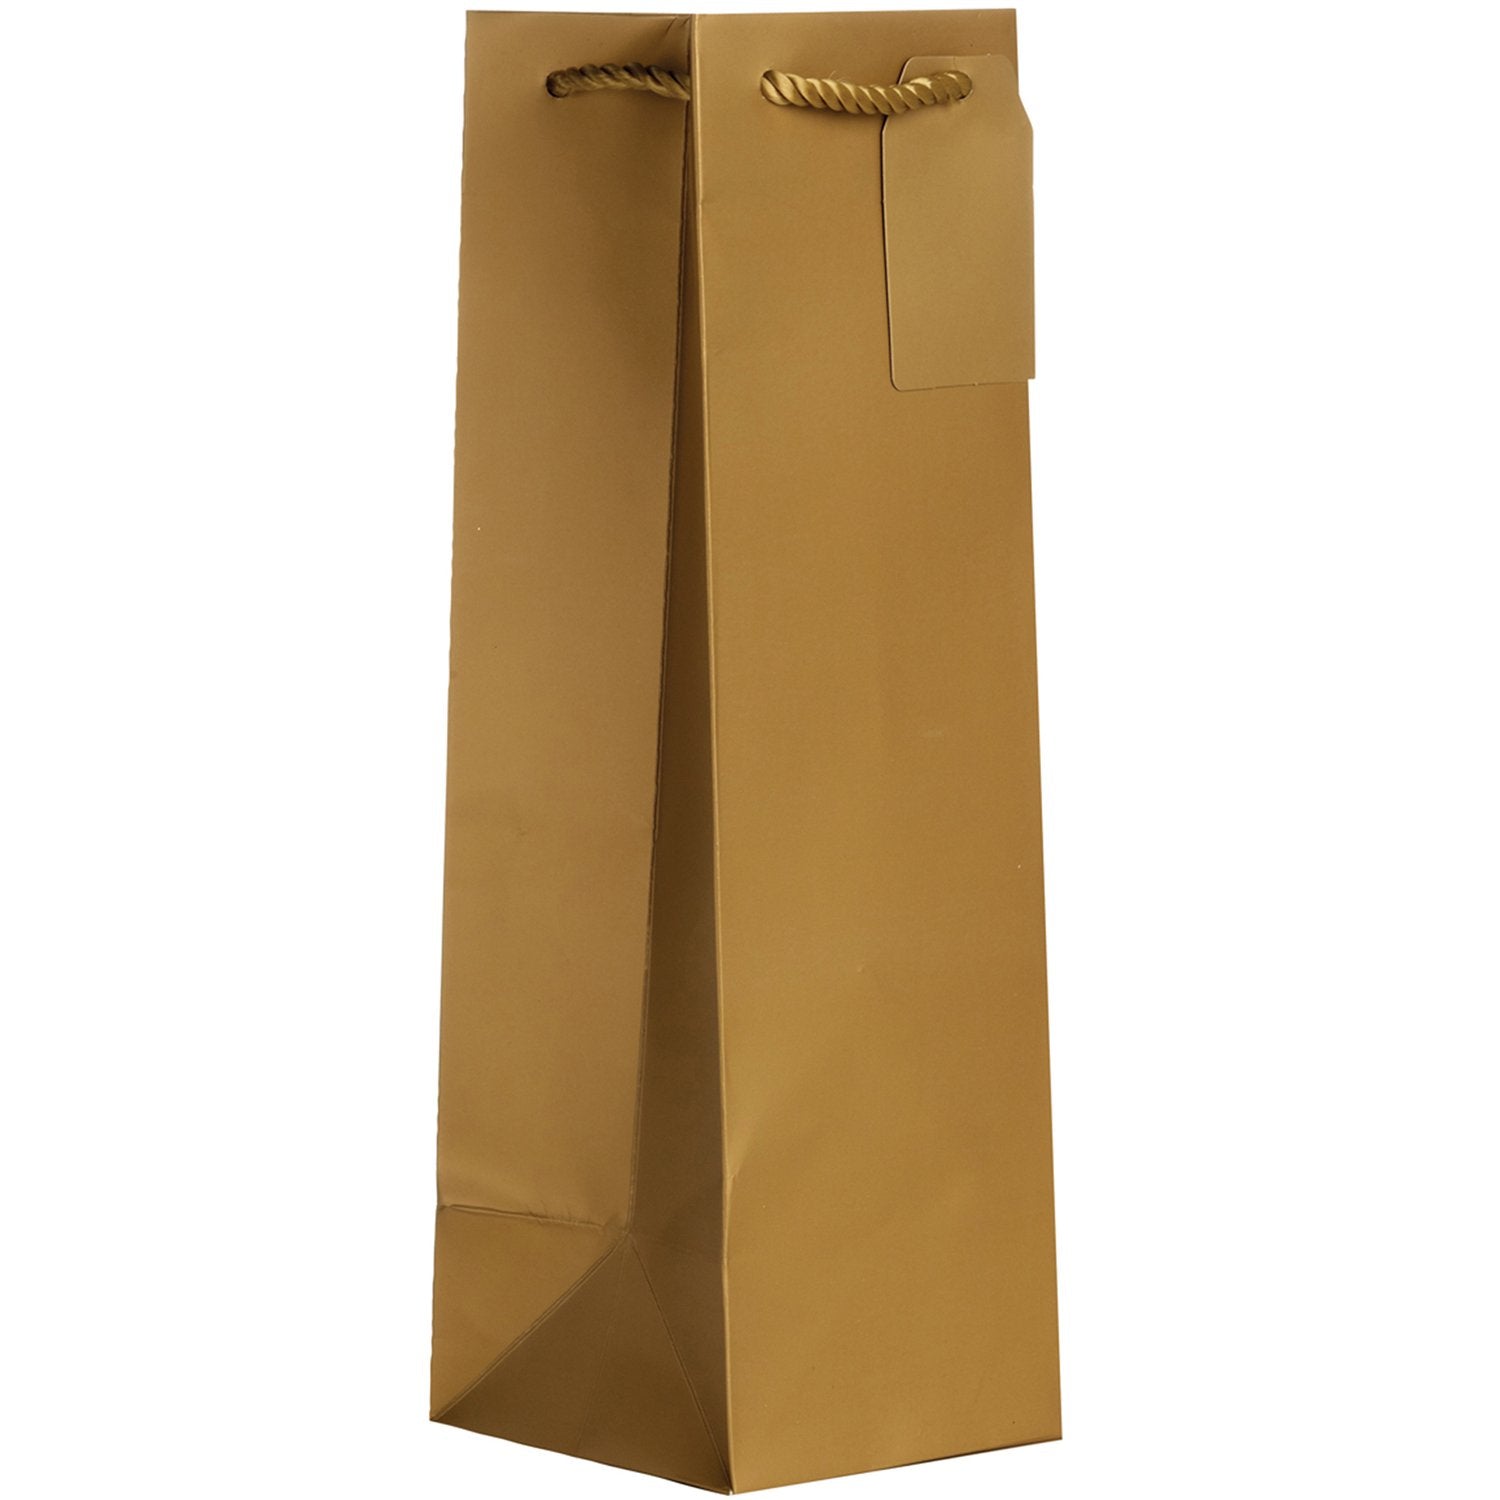 Heavyweight Solid Color Wine Bottle Gift Bags, Matte Metallic Gold